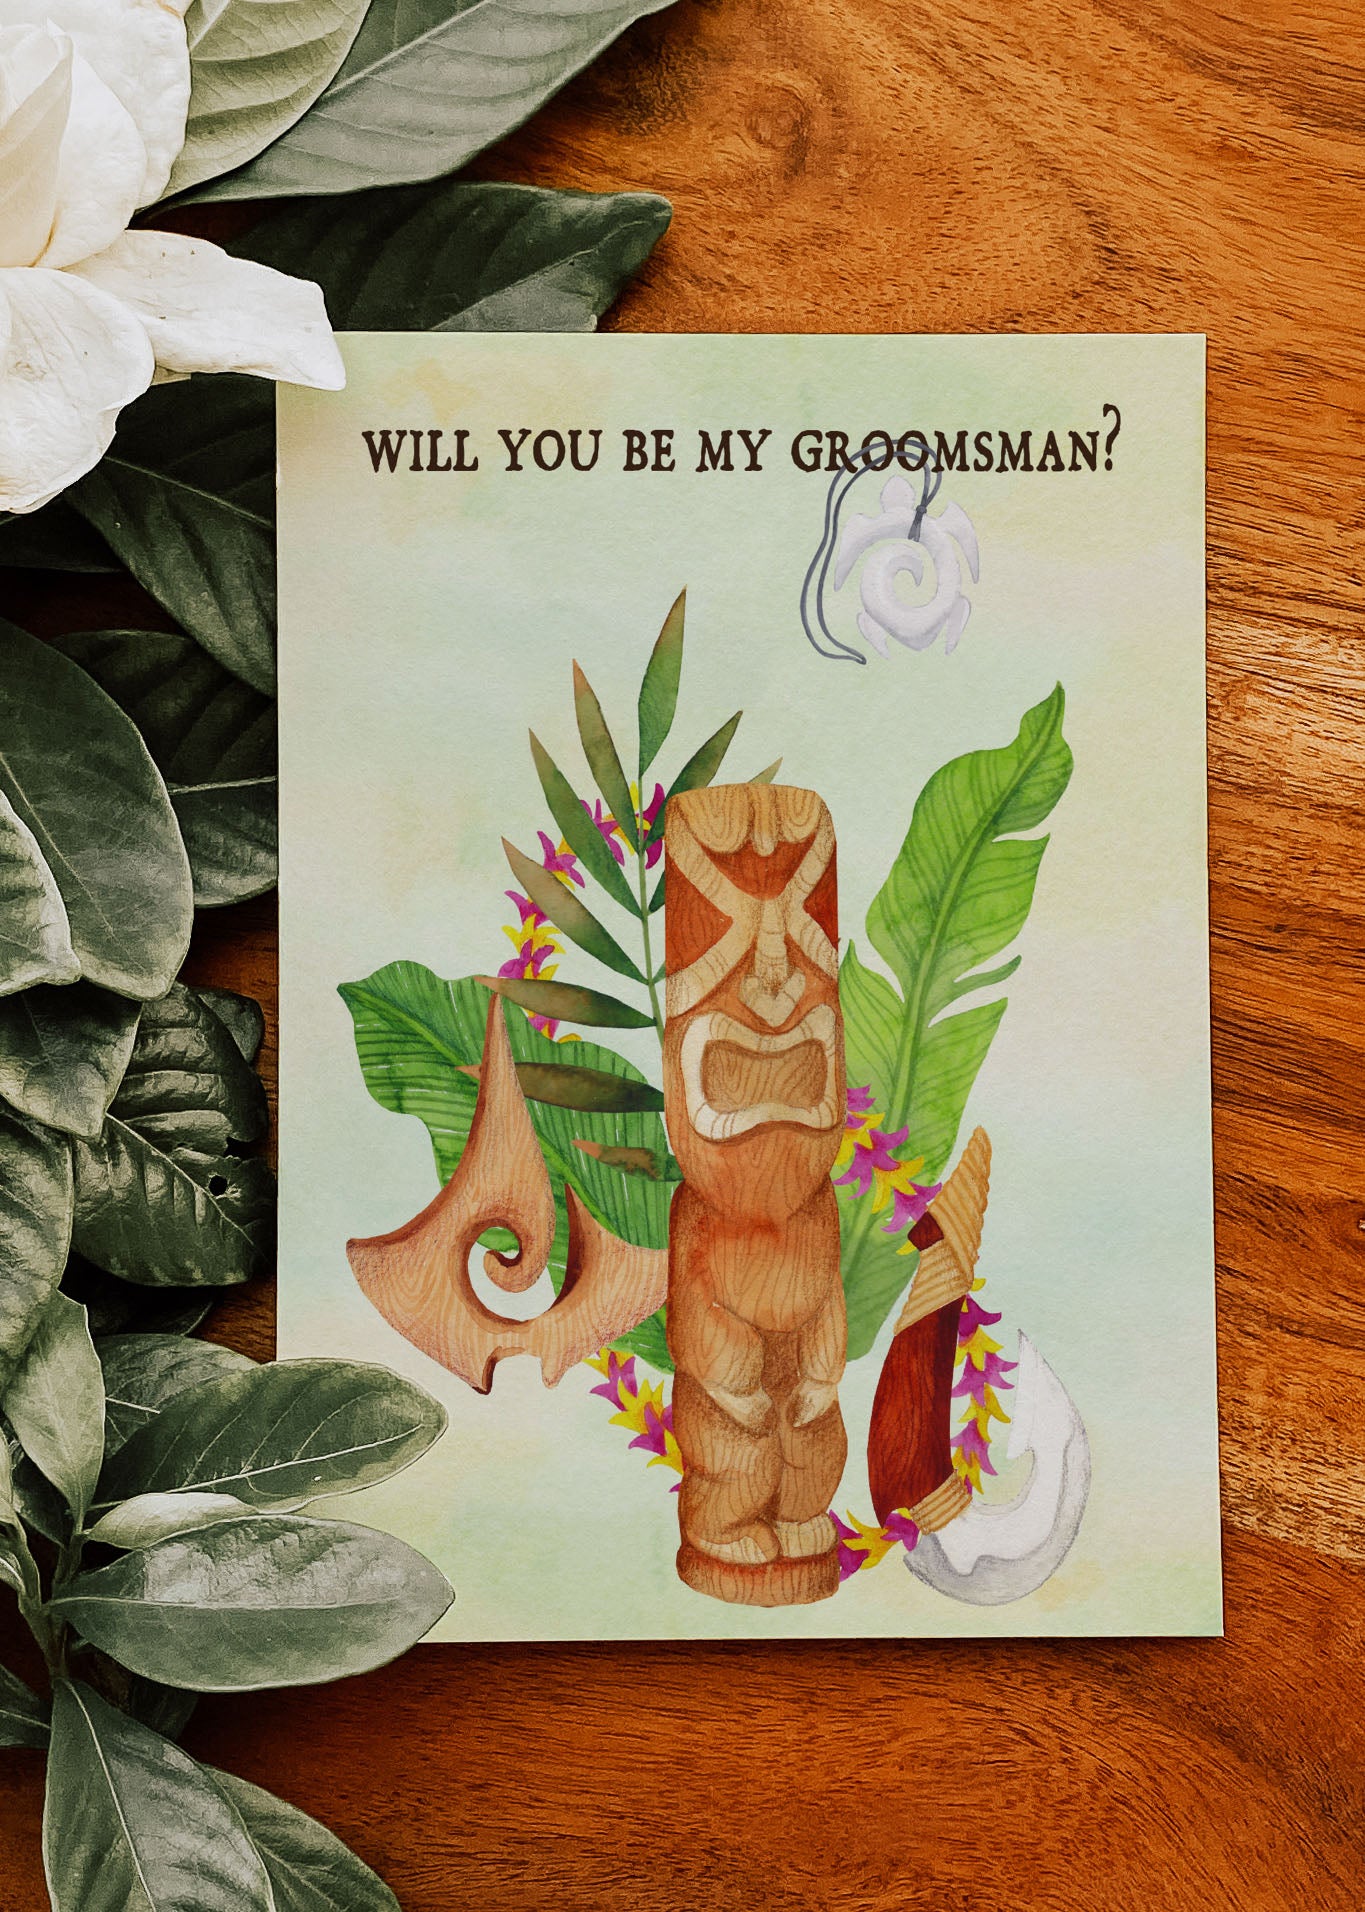 Tropical Floral Watercolor Beach Destination "Will you be my Groomsman" Digital "Instant Download" Invitation 1 - 'TROPICAL LUSH"